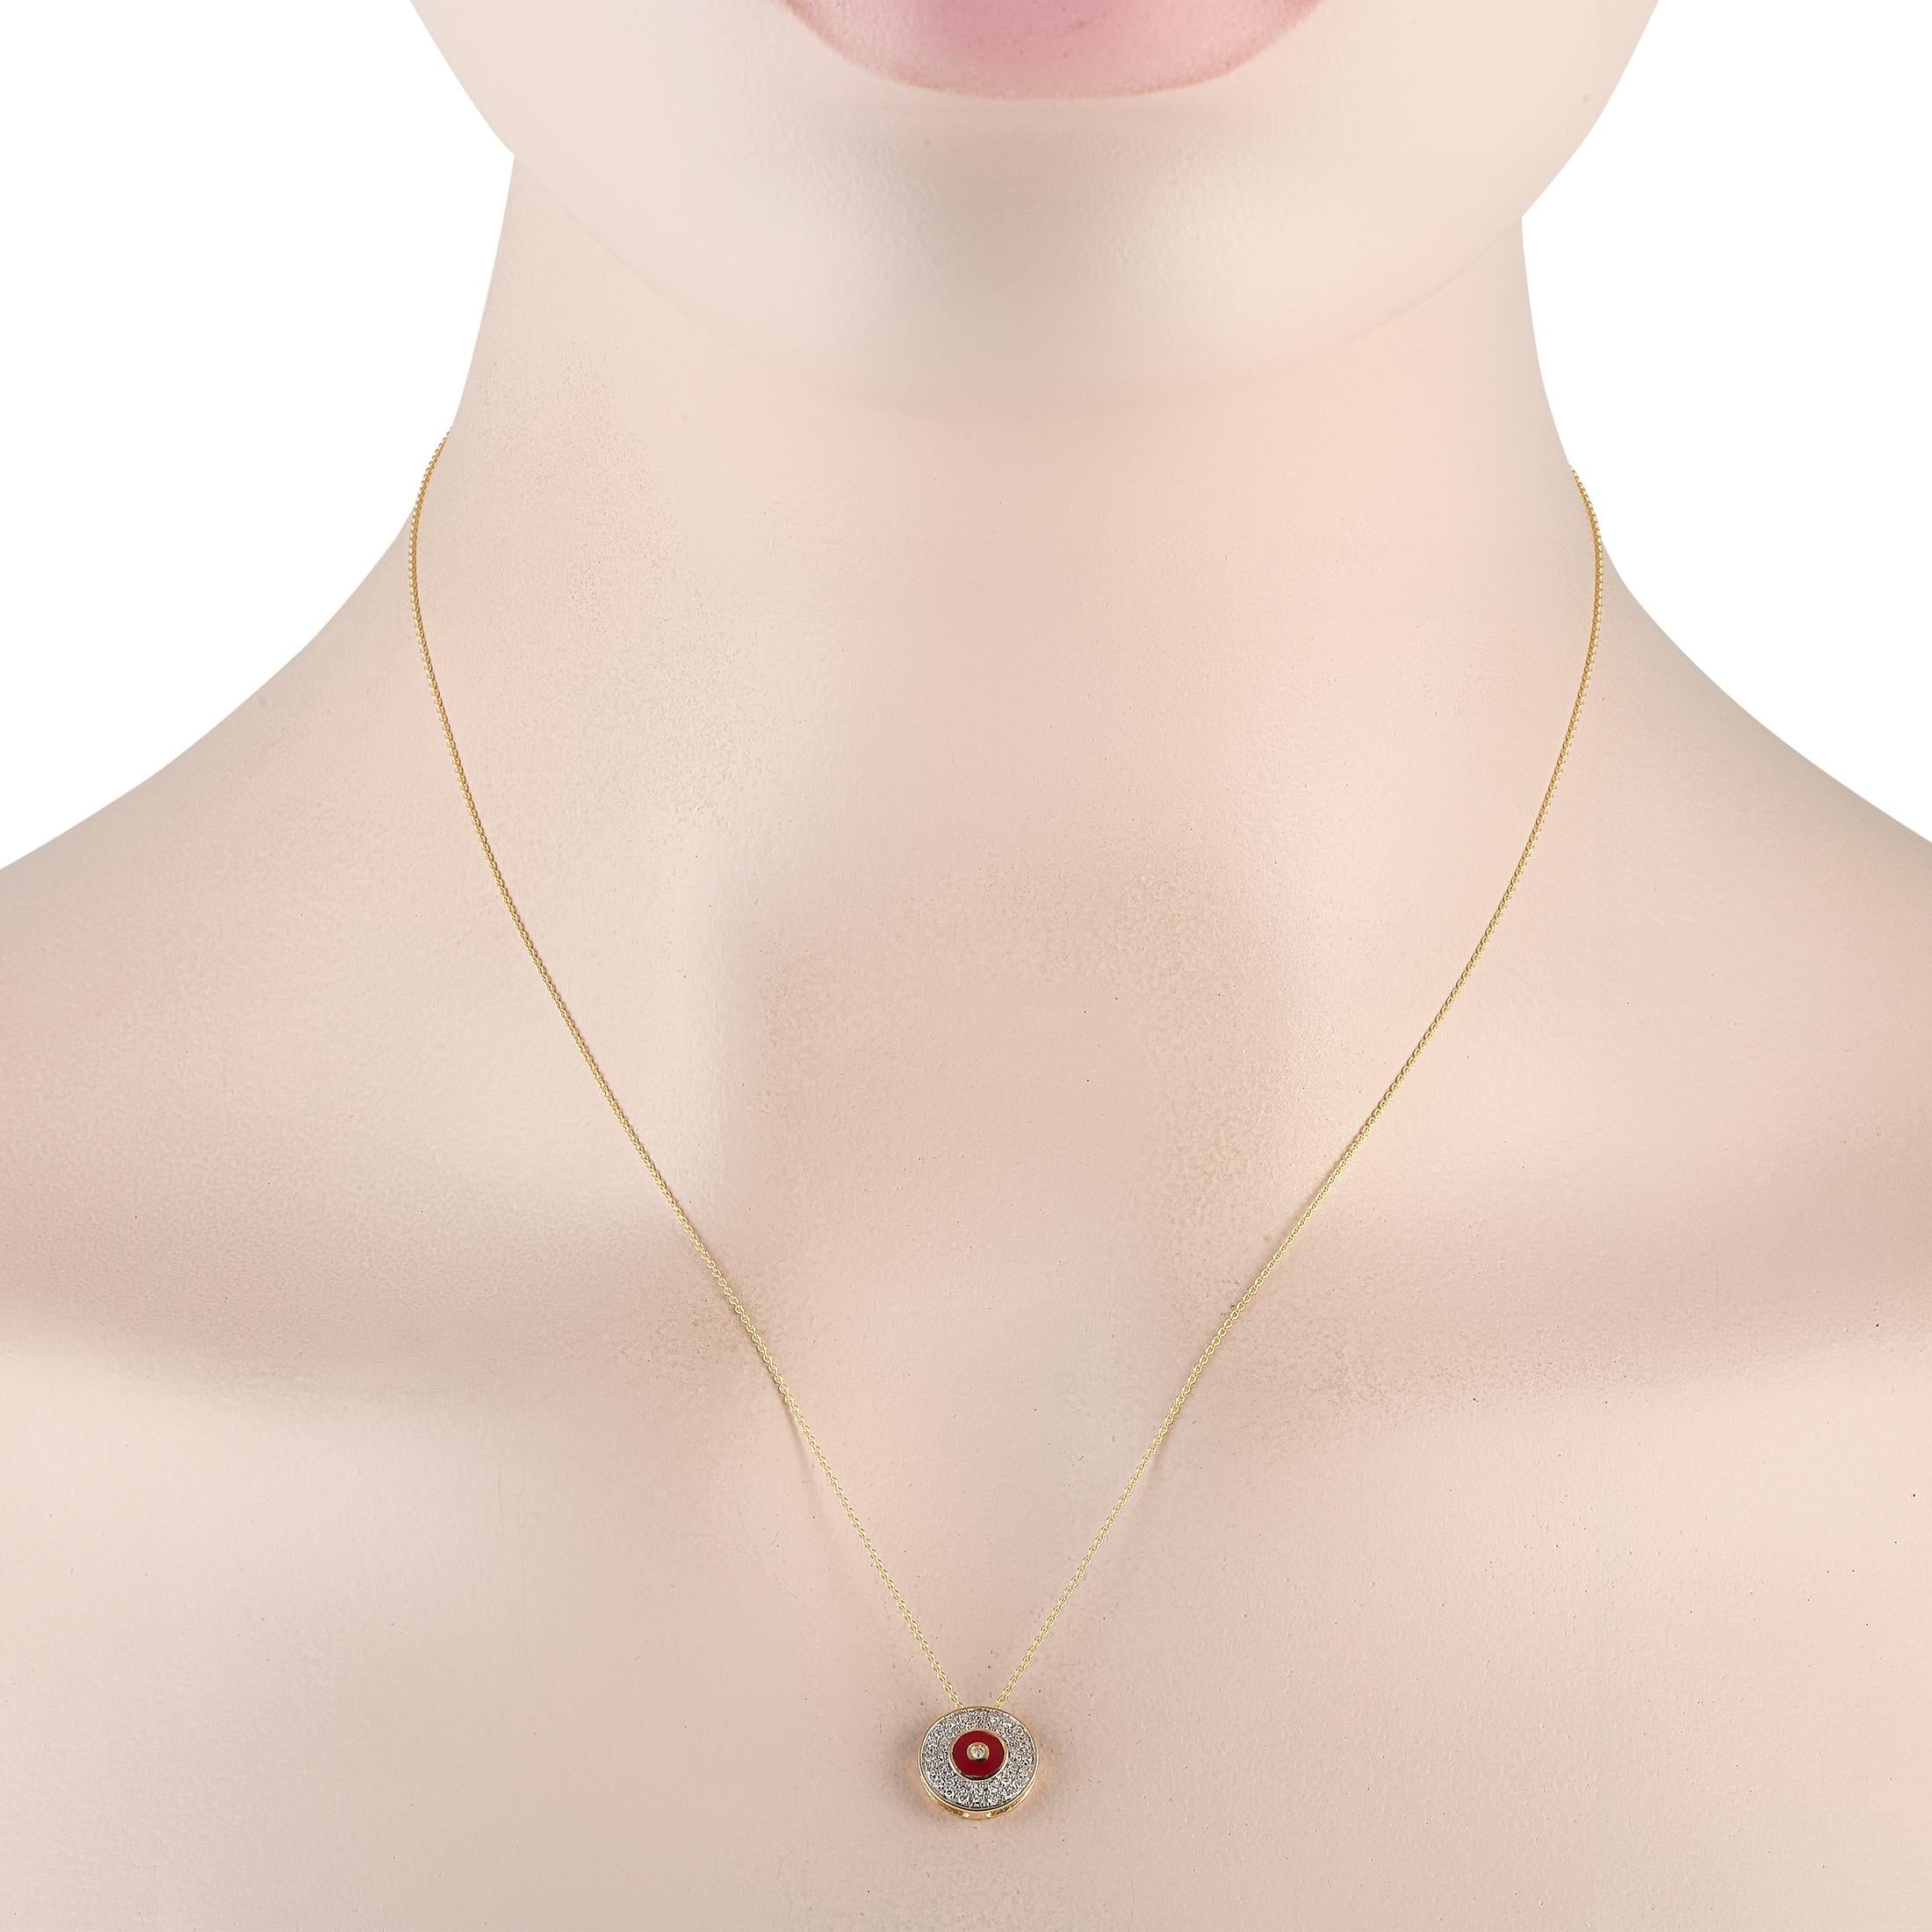 A circular pendant measuring 0.45 round serves as a stunning focal point on this elegant 14K Yellow Gold necklace. Diamonds with a total weight of 0.20 carats provide plenty of sparkle, while a red accent adds the perfect pop of color. Its attached